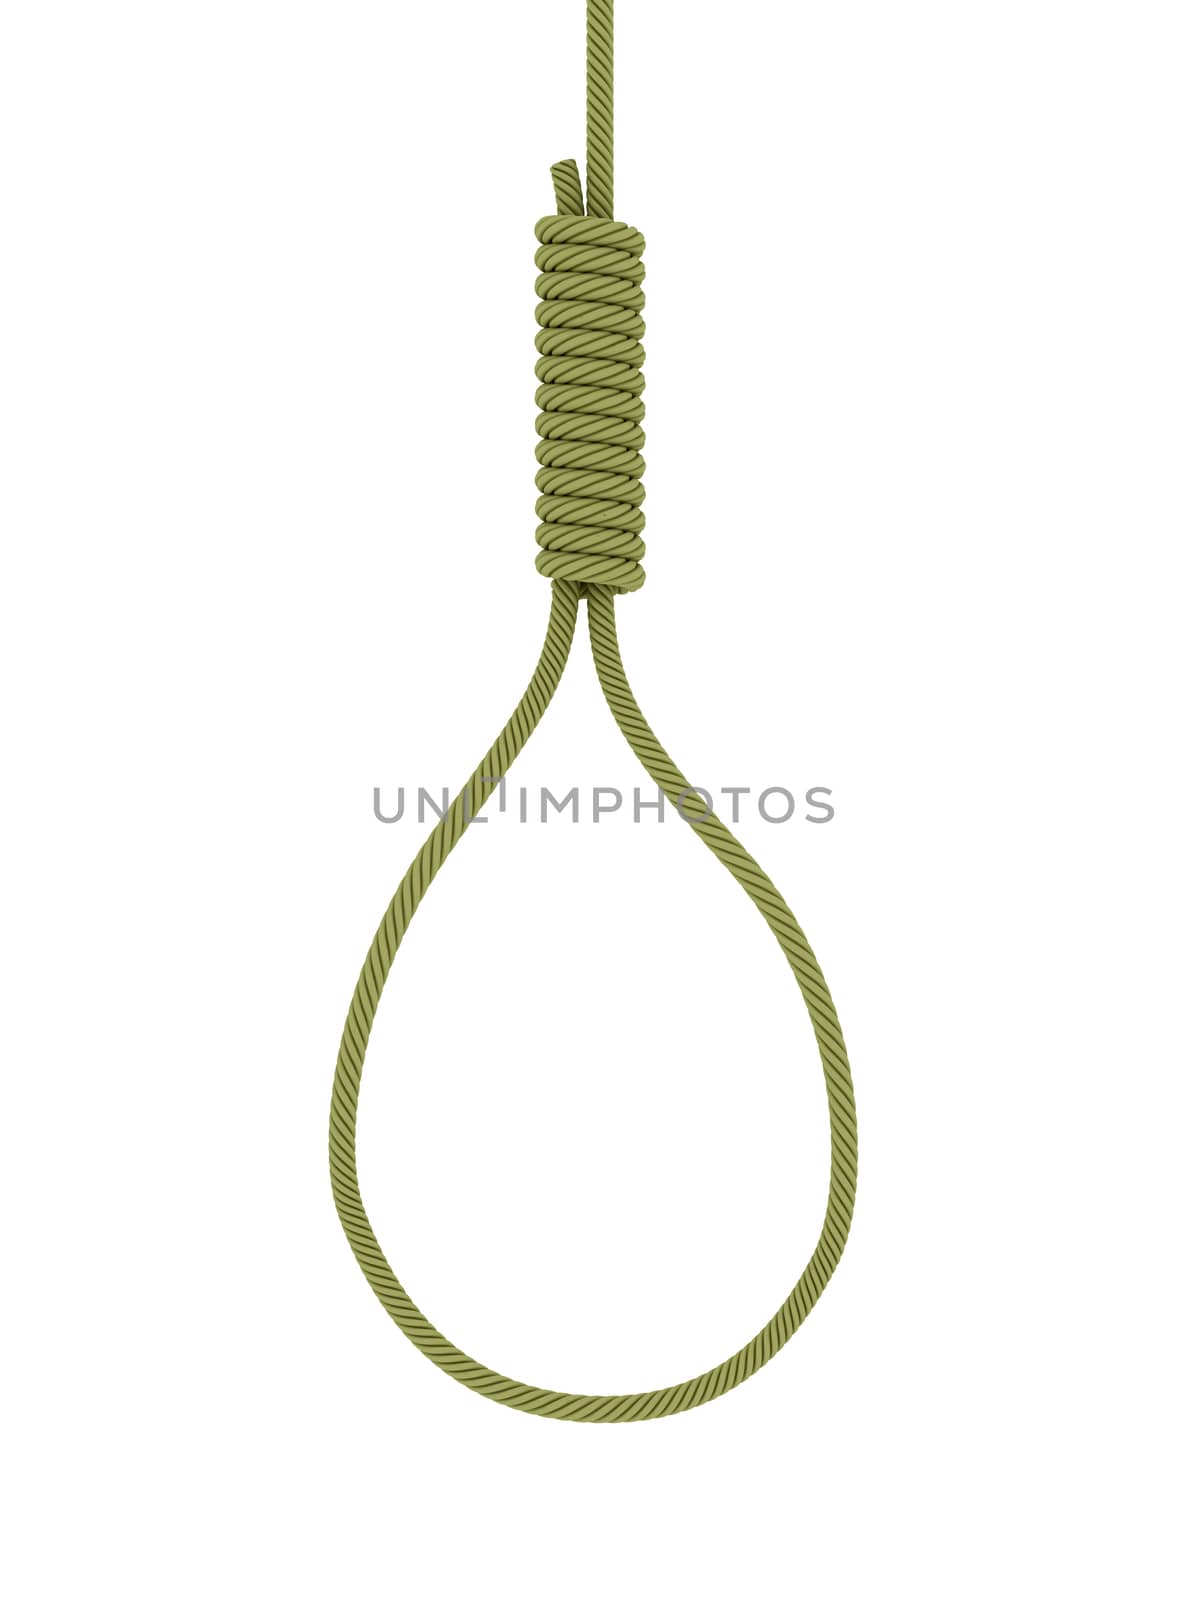 gallows on white background. Isolated 3D image